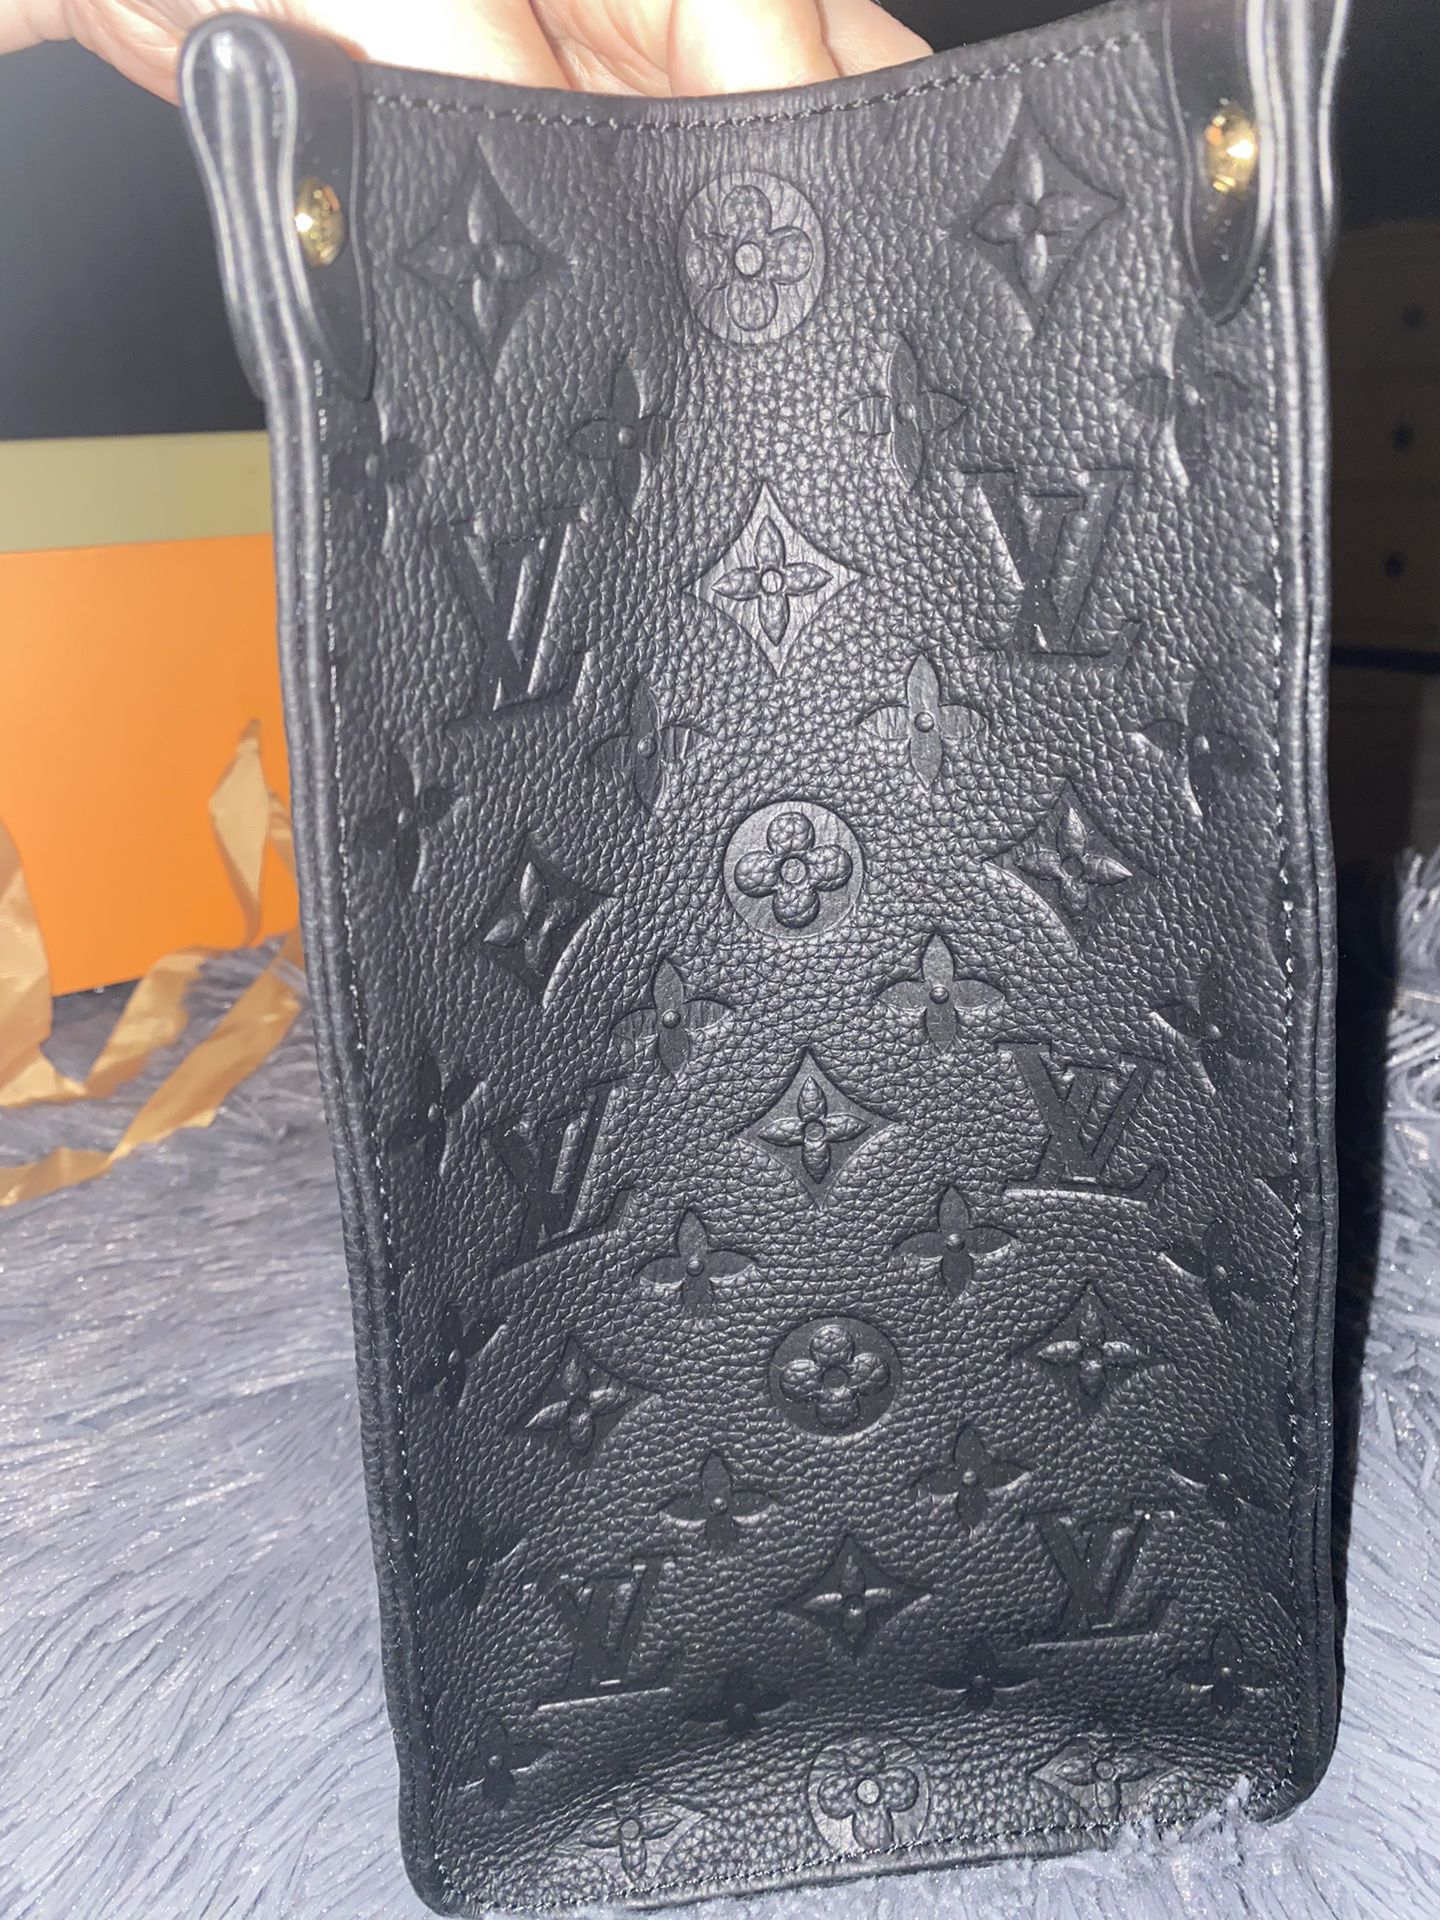 Onthego MM Bag for Sale in Mesa, AZ - OfferUp